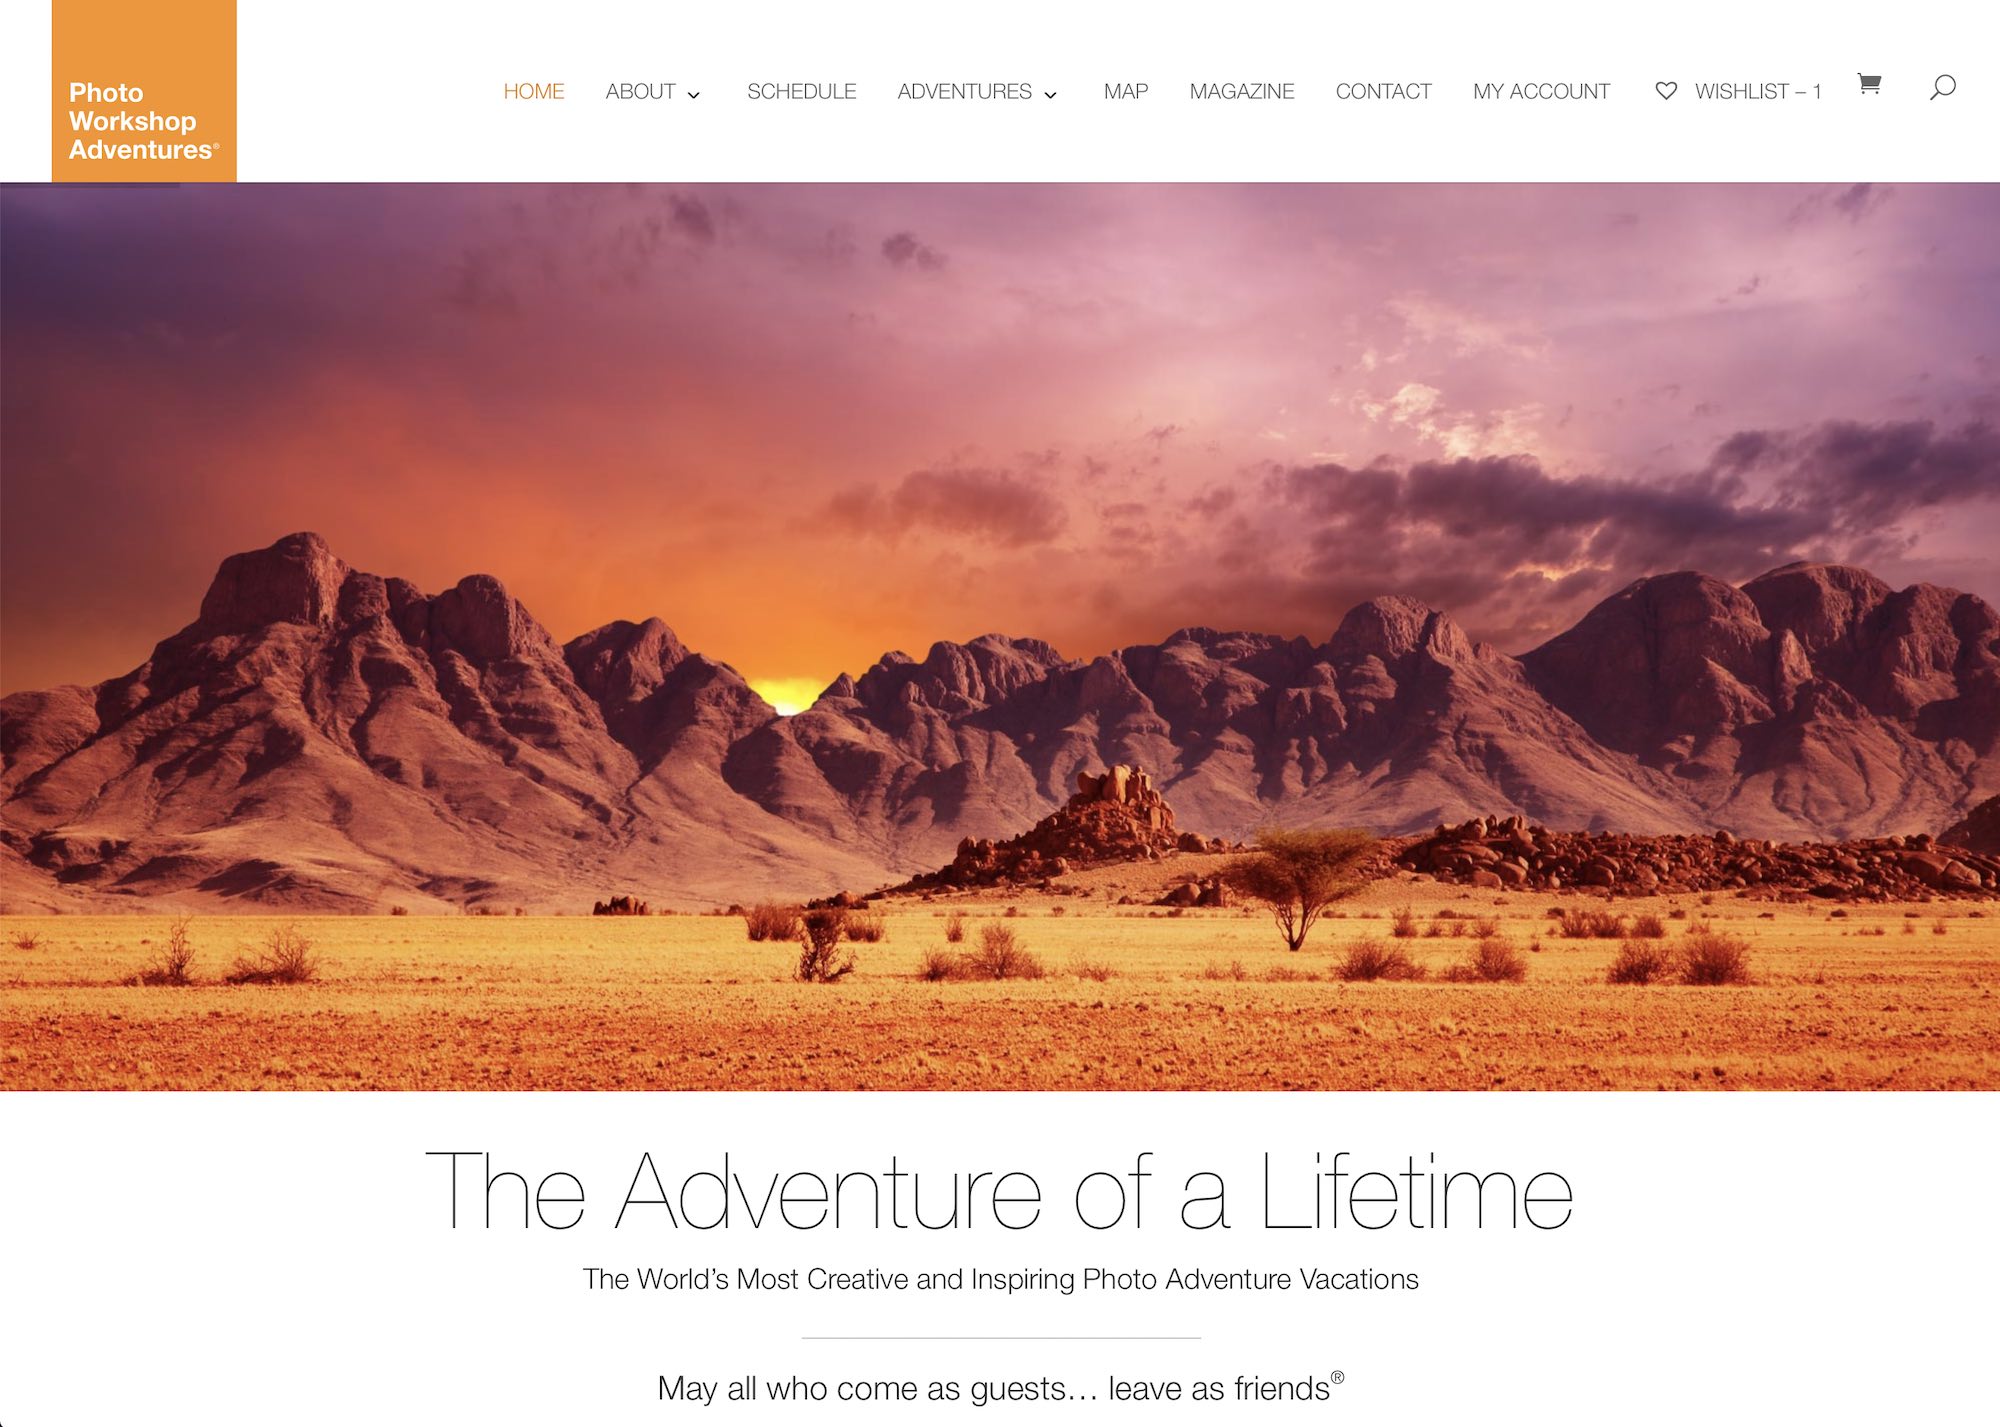 PRESS RELEASE: Photo Workshop Adventures launches a NEW website!